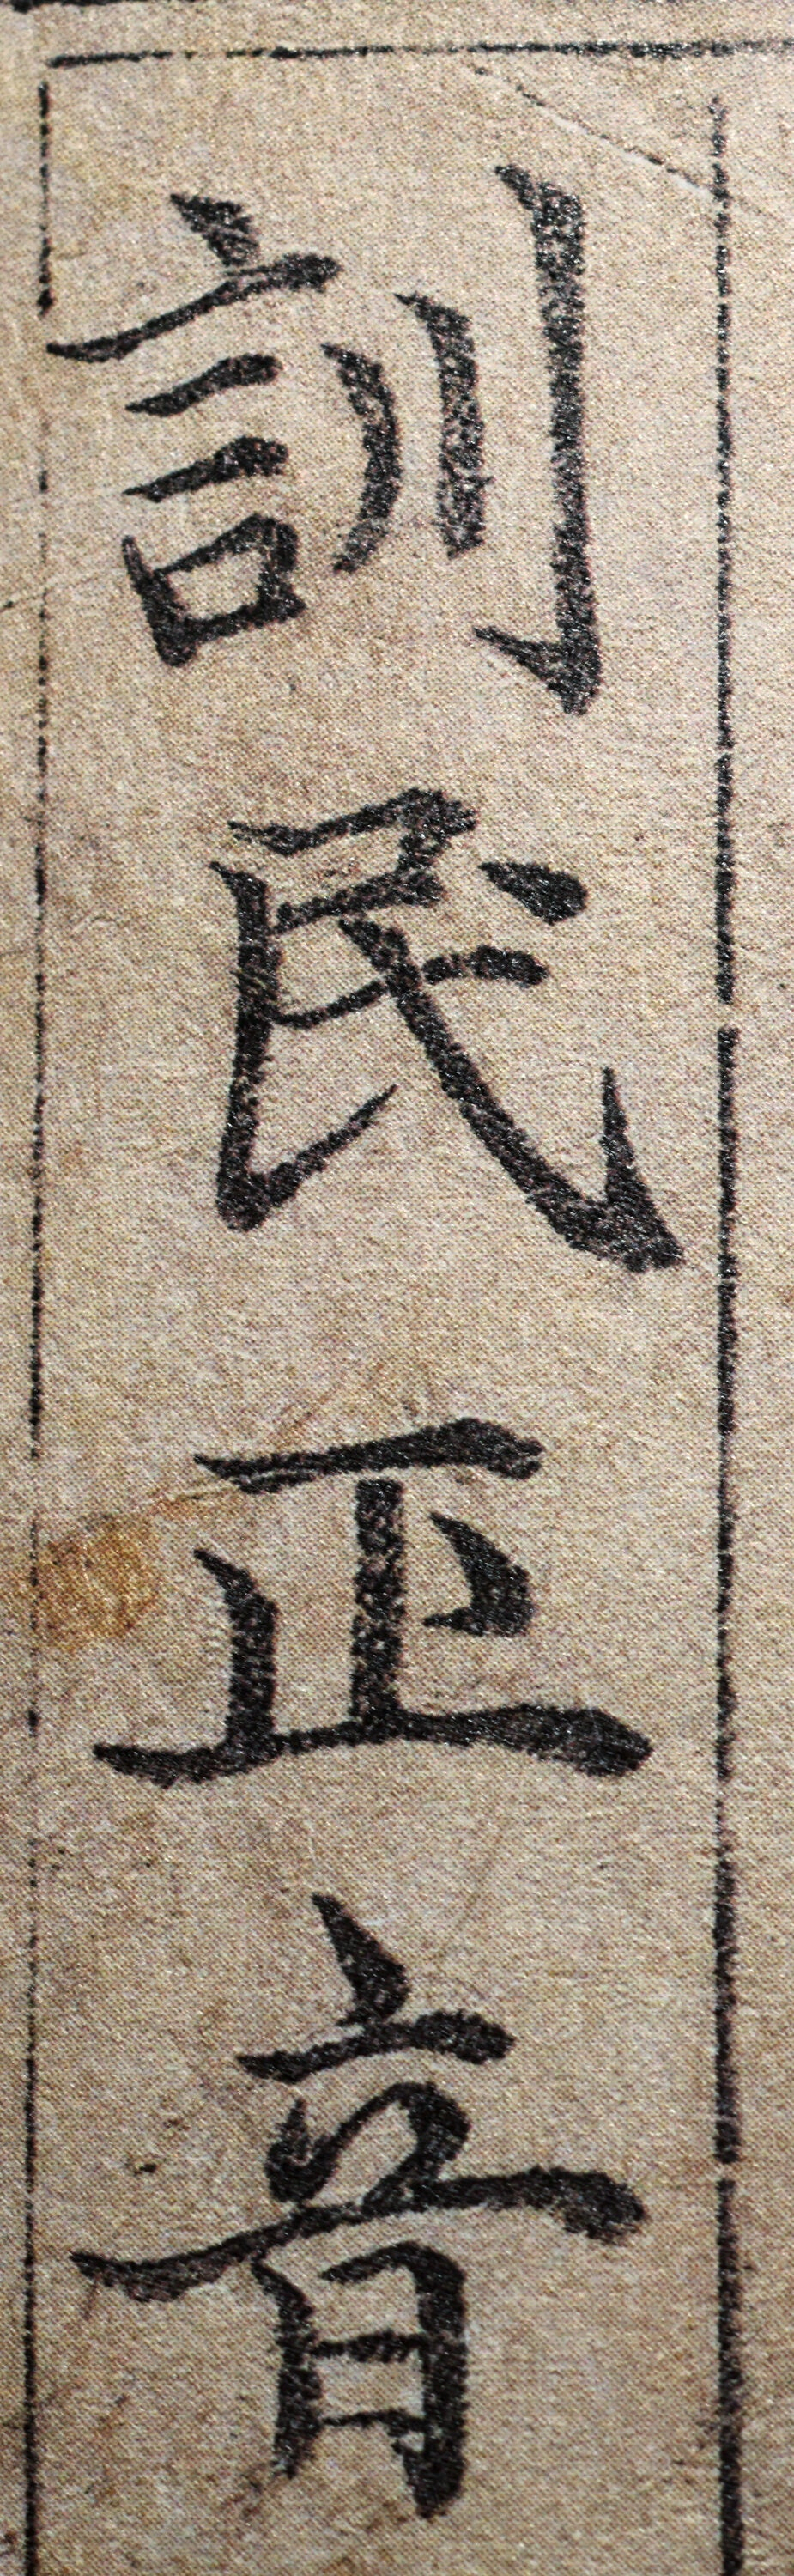 Hunminjeongeum, the title of the book introducing the new writing system and also initially the name of the new script, written in Hanja.Photo taken from a replica of the Hunminjeongeum Haeryebon, the original study guide.